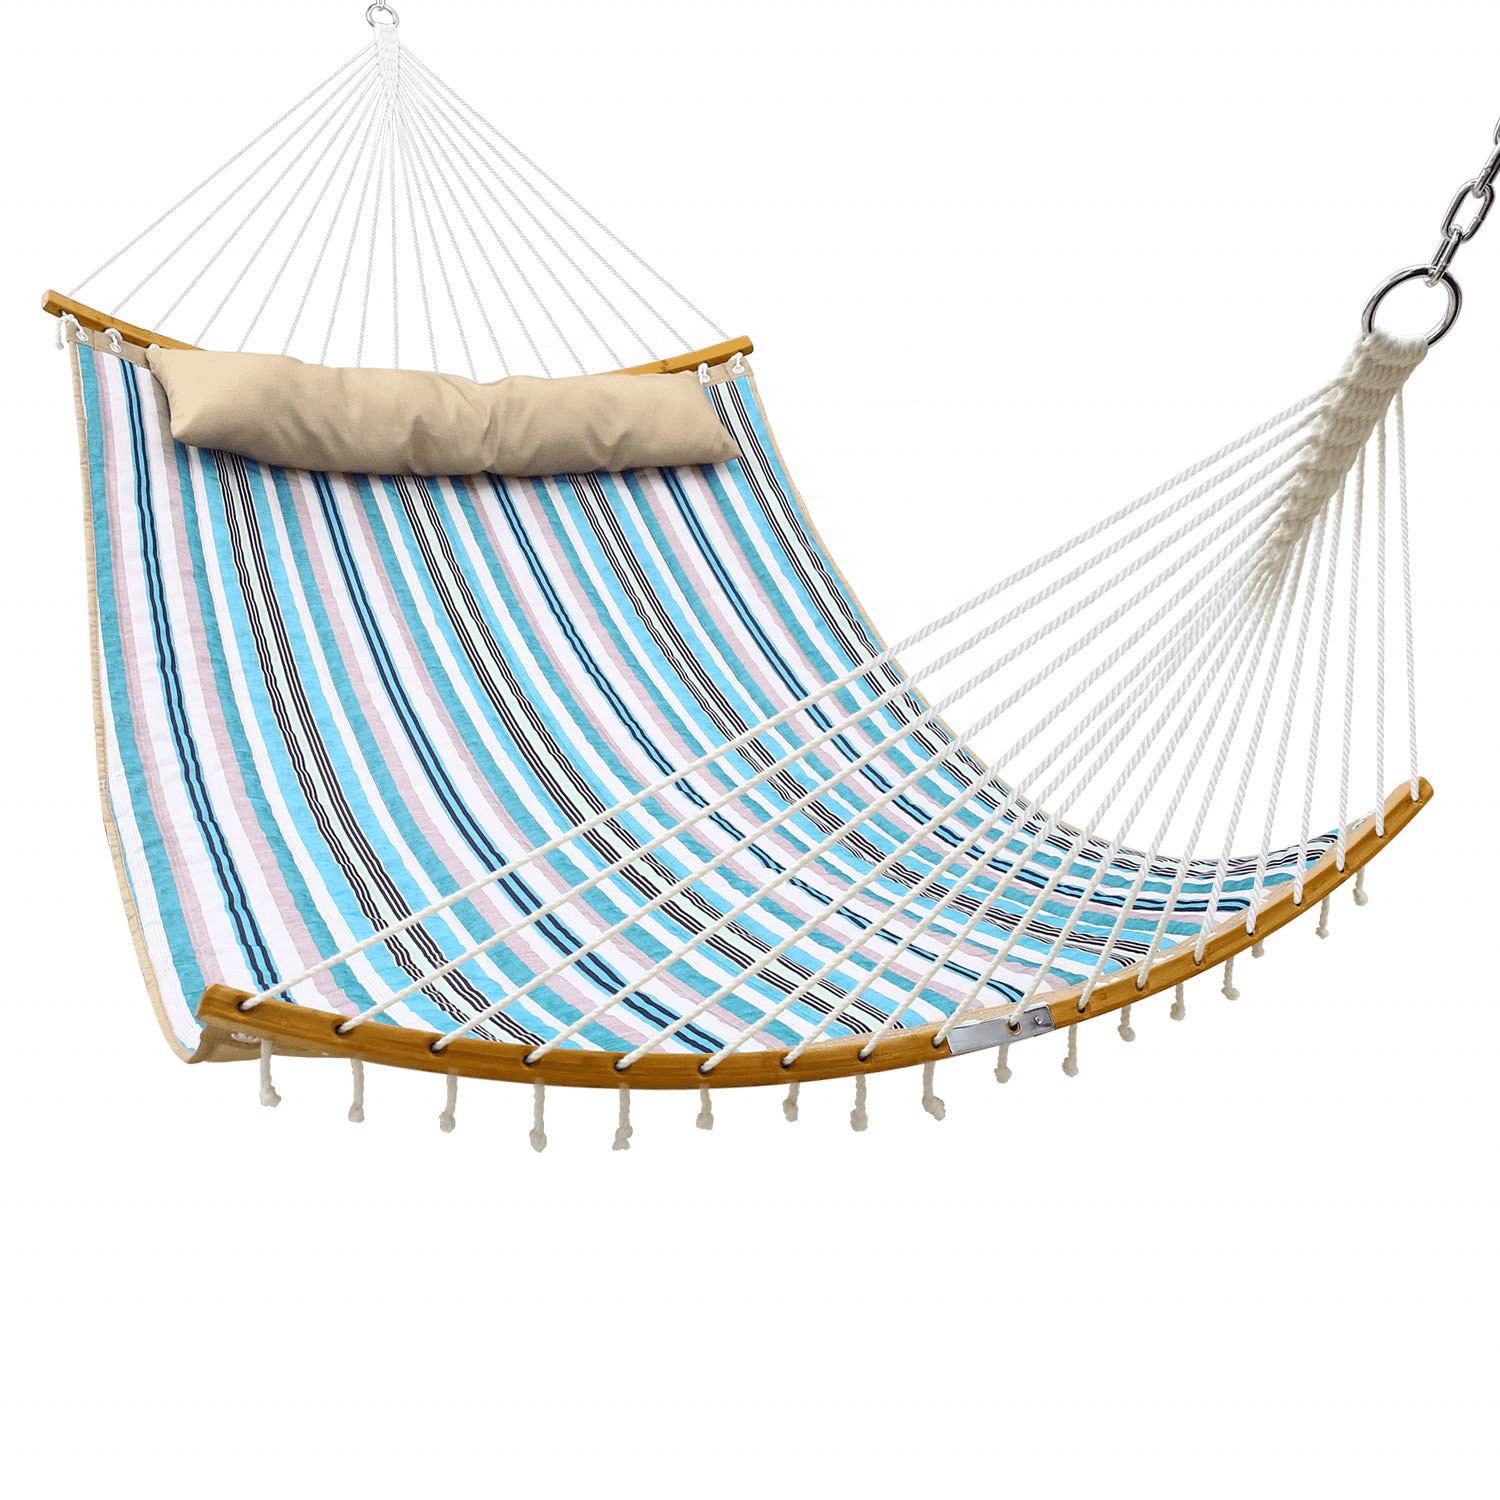 OEM/ODM China Fabric Hanging Chair - Curved Folding Bar Portable Hammock with Pillow and Carry Bag Hammock Swing 	Quilted hammock – Top Asian